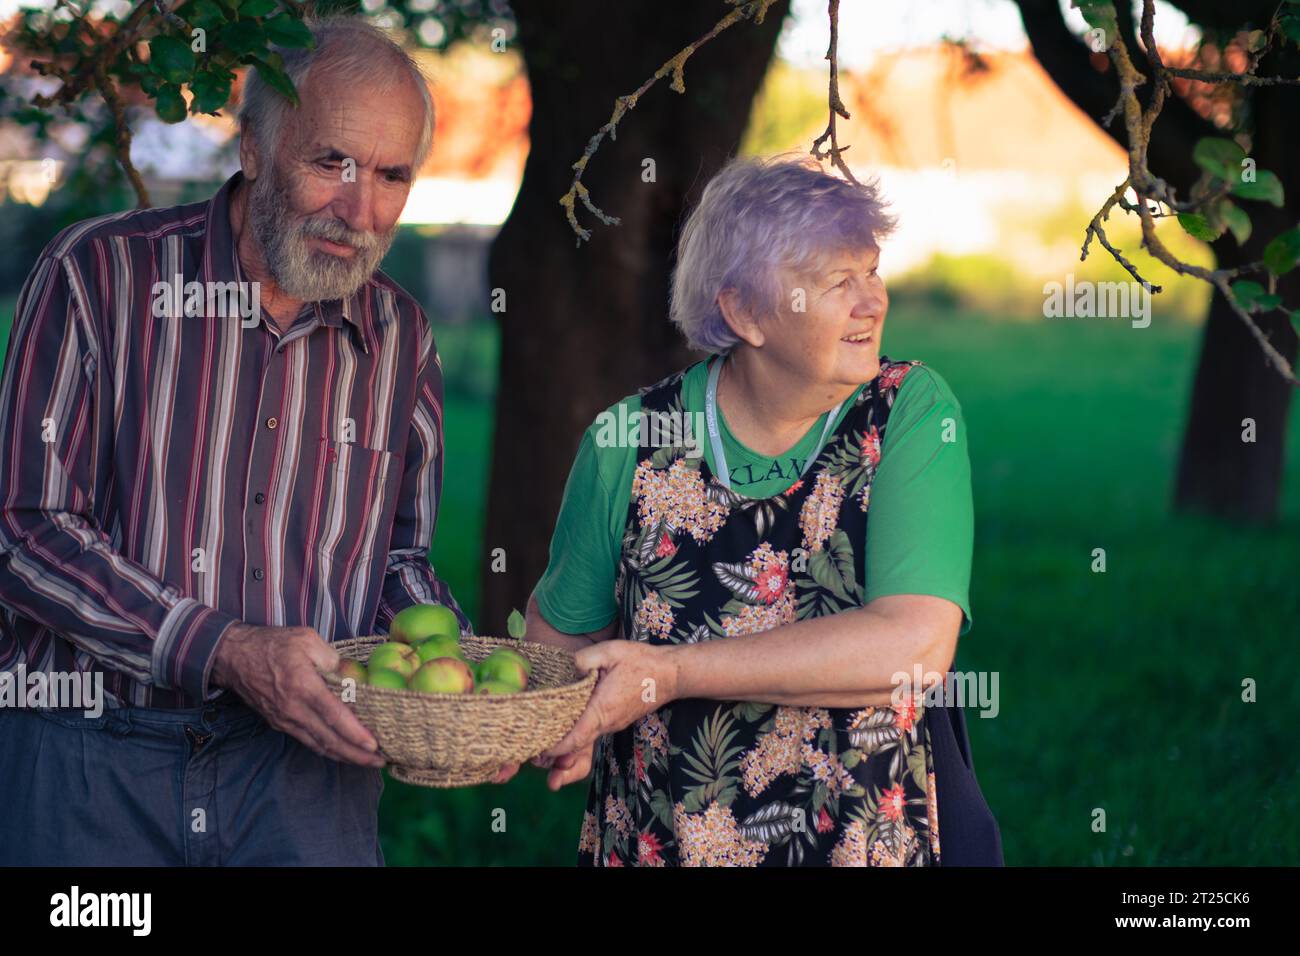 A couple of elderly people cheerfully picking apples in a shady orchard in early autumn. Healthy and well-behaved seniors enjoy life. Stock Photo